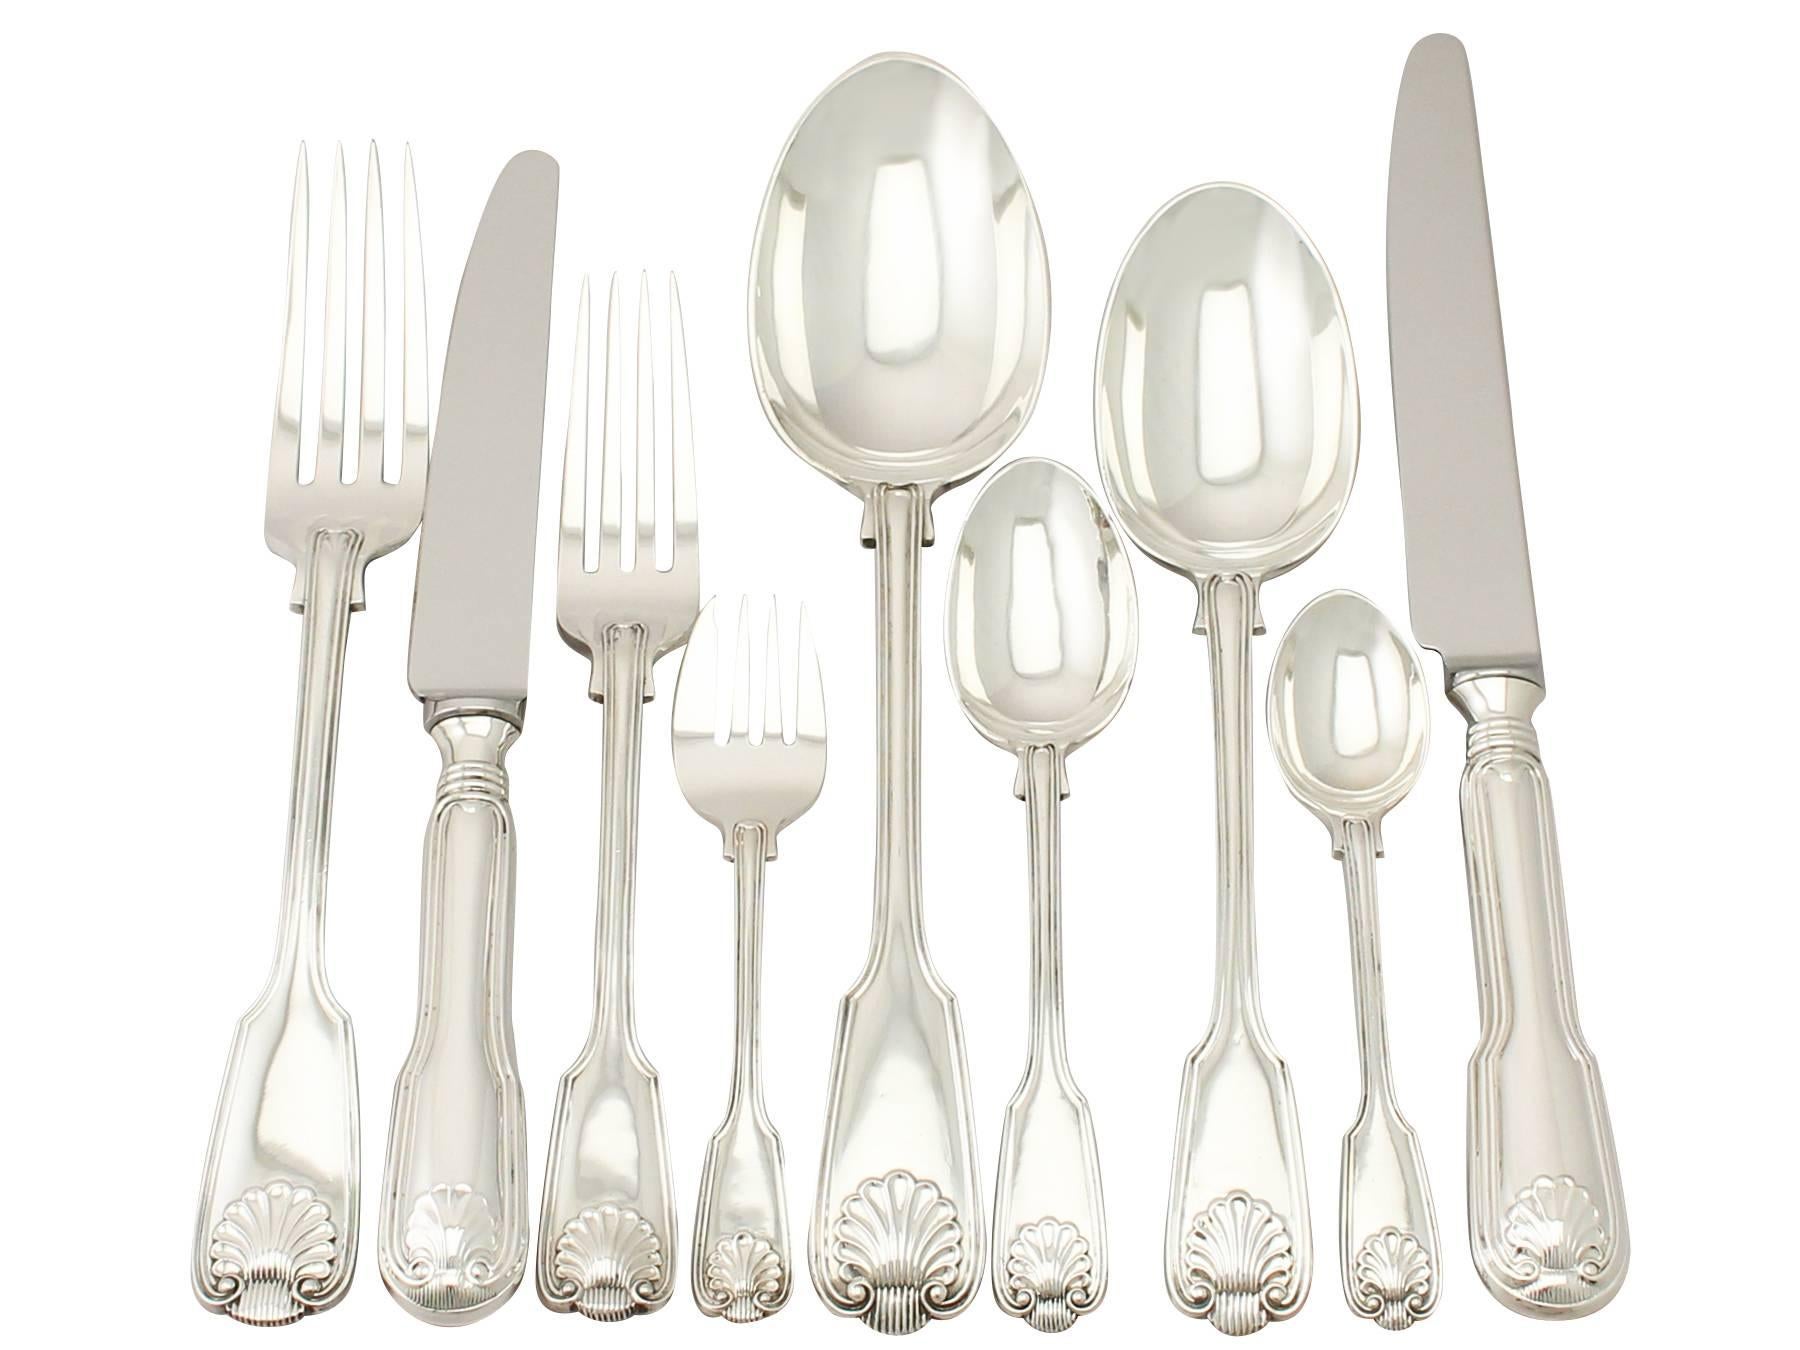 An exceptional, fine and impressive antique Victorian English sterling silver straight Fiddle Thread and Shell pattern flatware service for six persons; an addition to our canteen of cutlery collection.

The pieces of this magnificent and